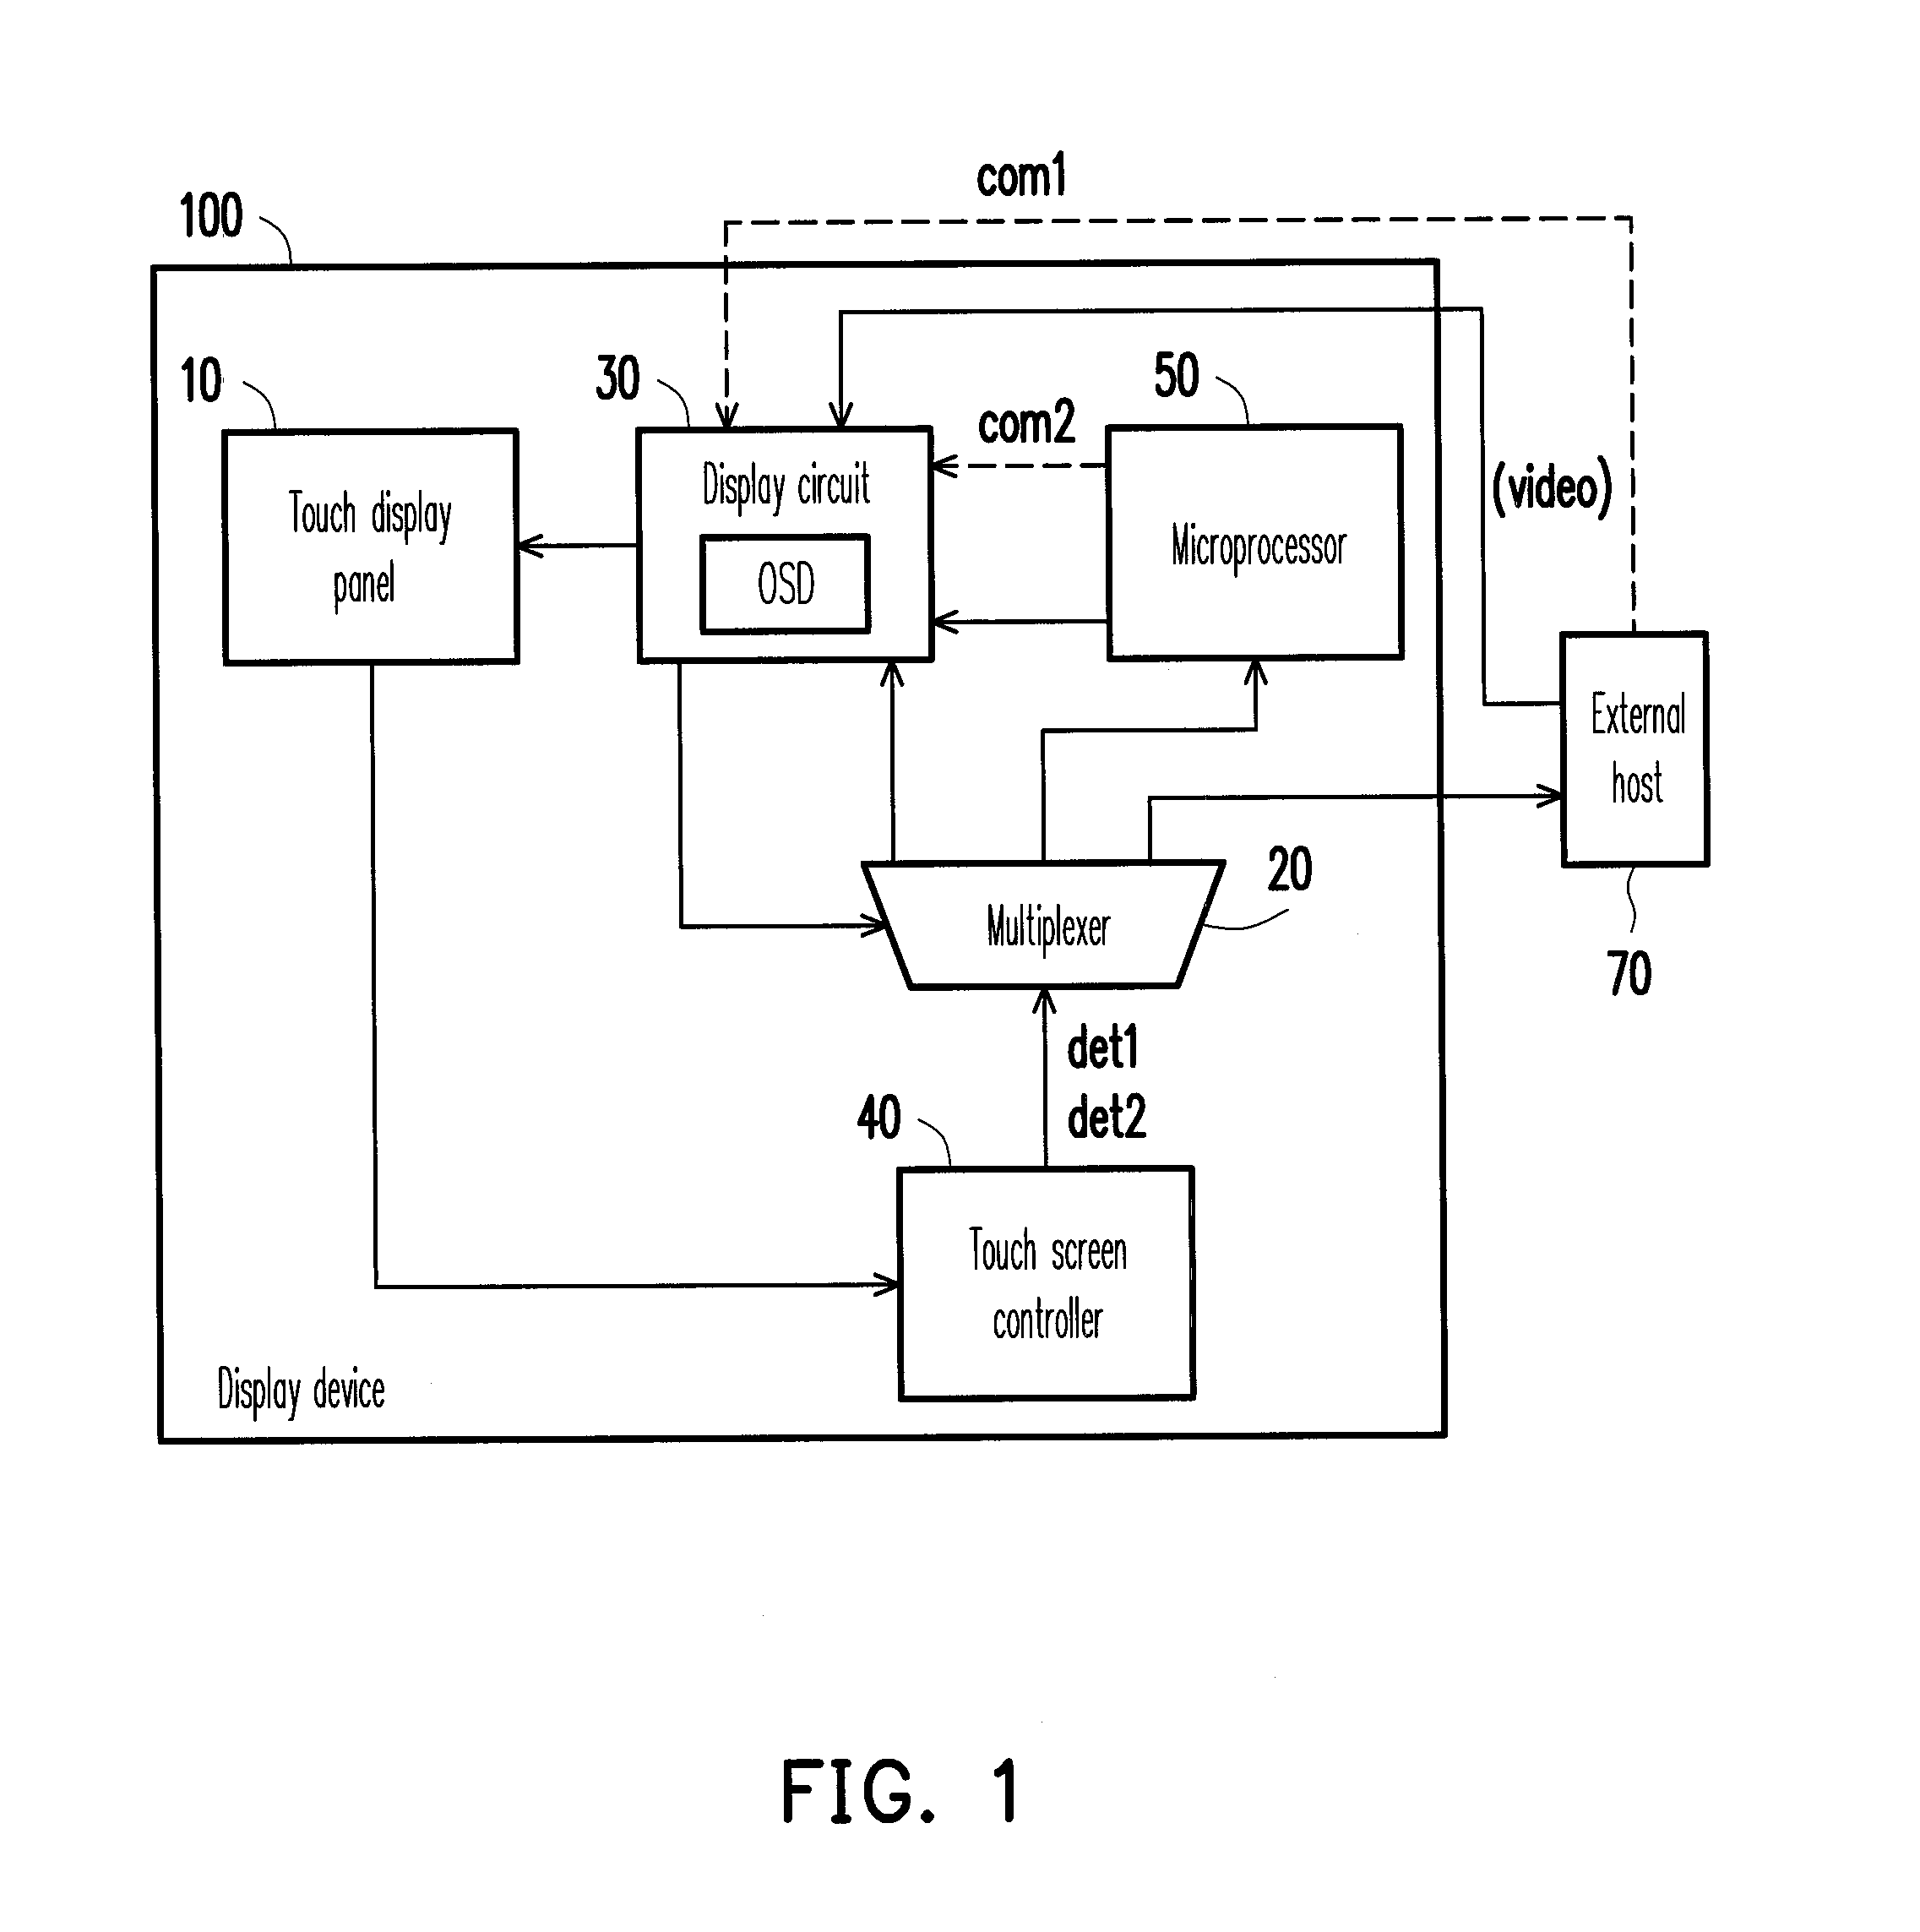 Display device with on-screen display menu function